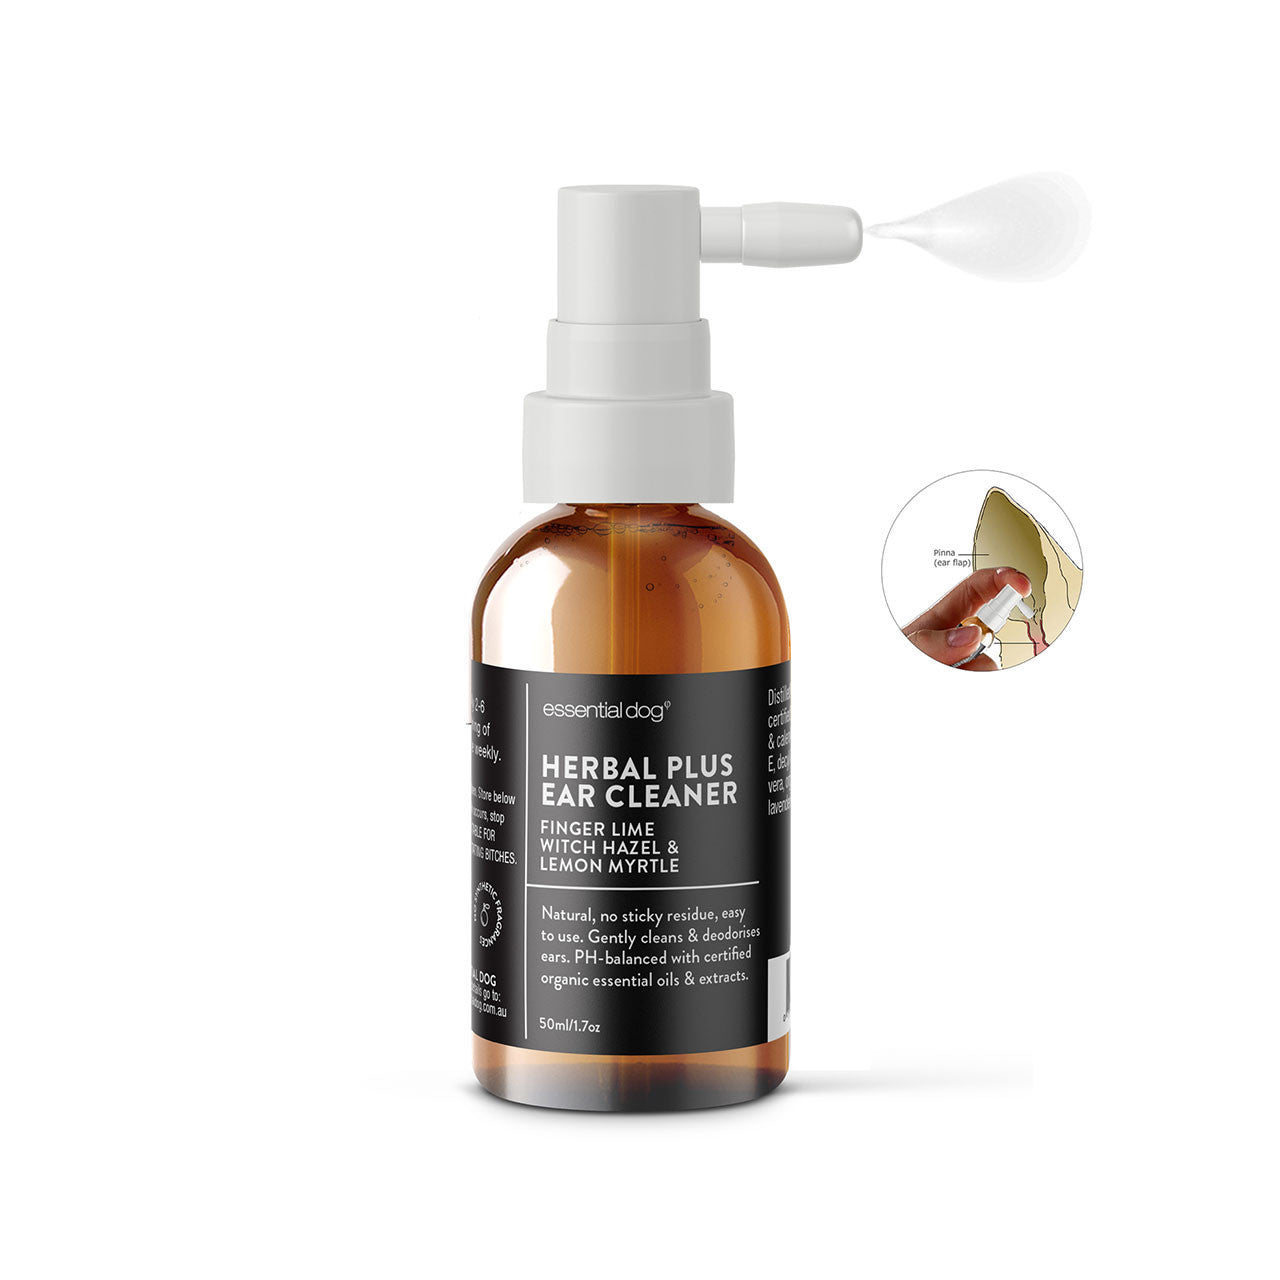 Natural herbal dog ear cleaner with spray attachment on white background. Features a graphic on how to apply to the ear by spraying just inside the ear.